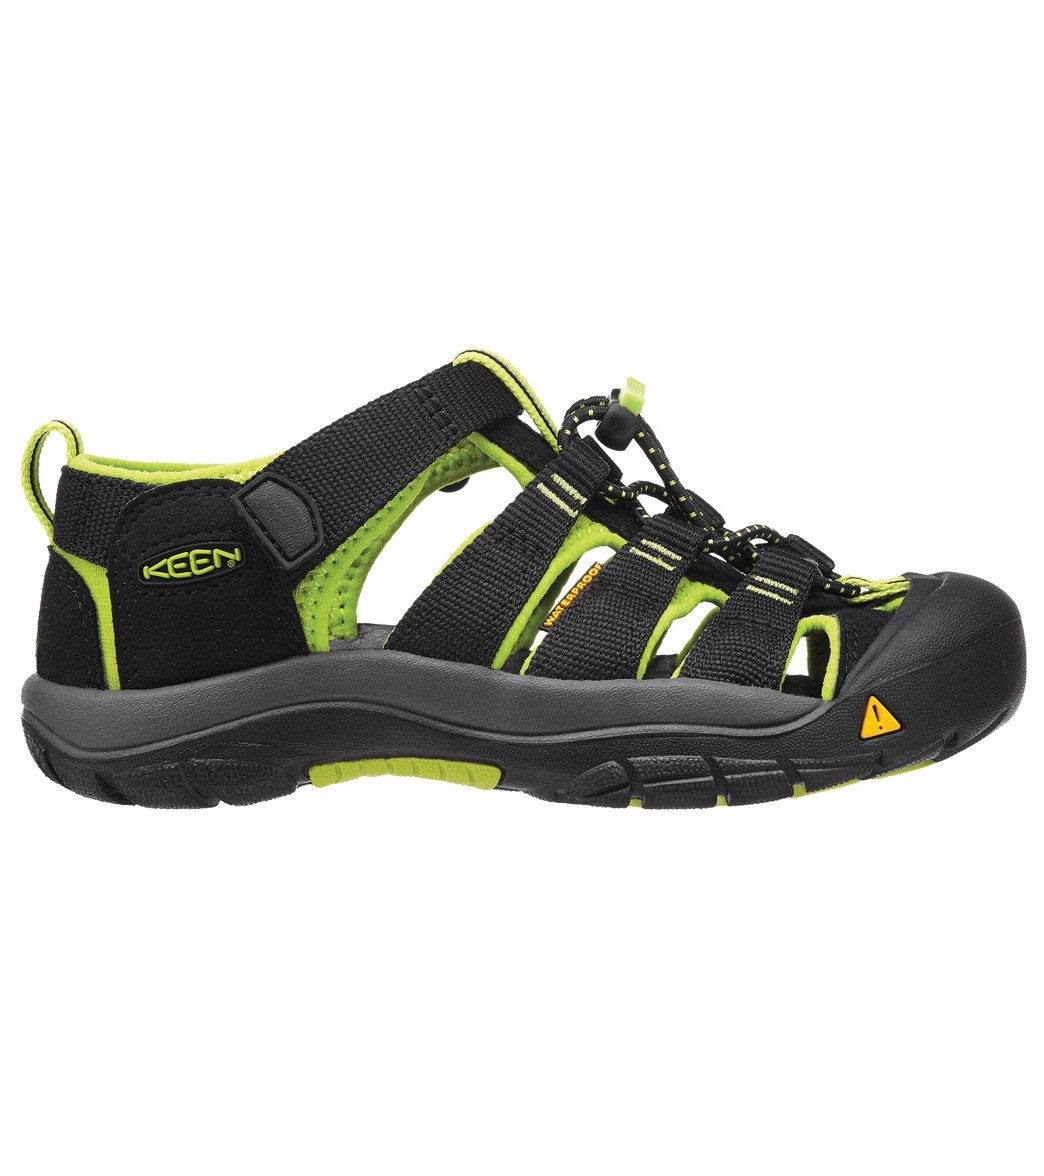 Keen Youth's Newport H2 Water Shoe - Black/Lime Green 2 - Swimoutlet.com